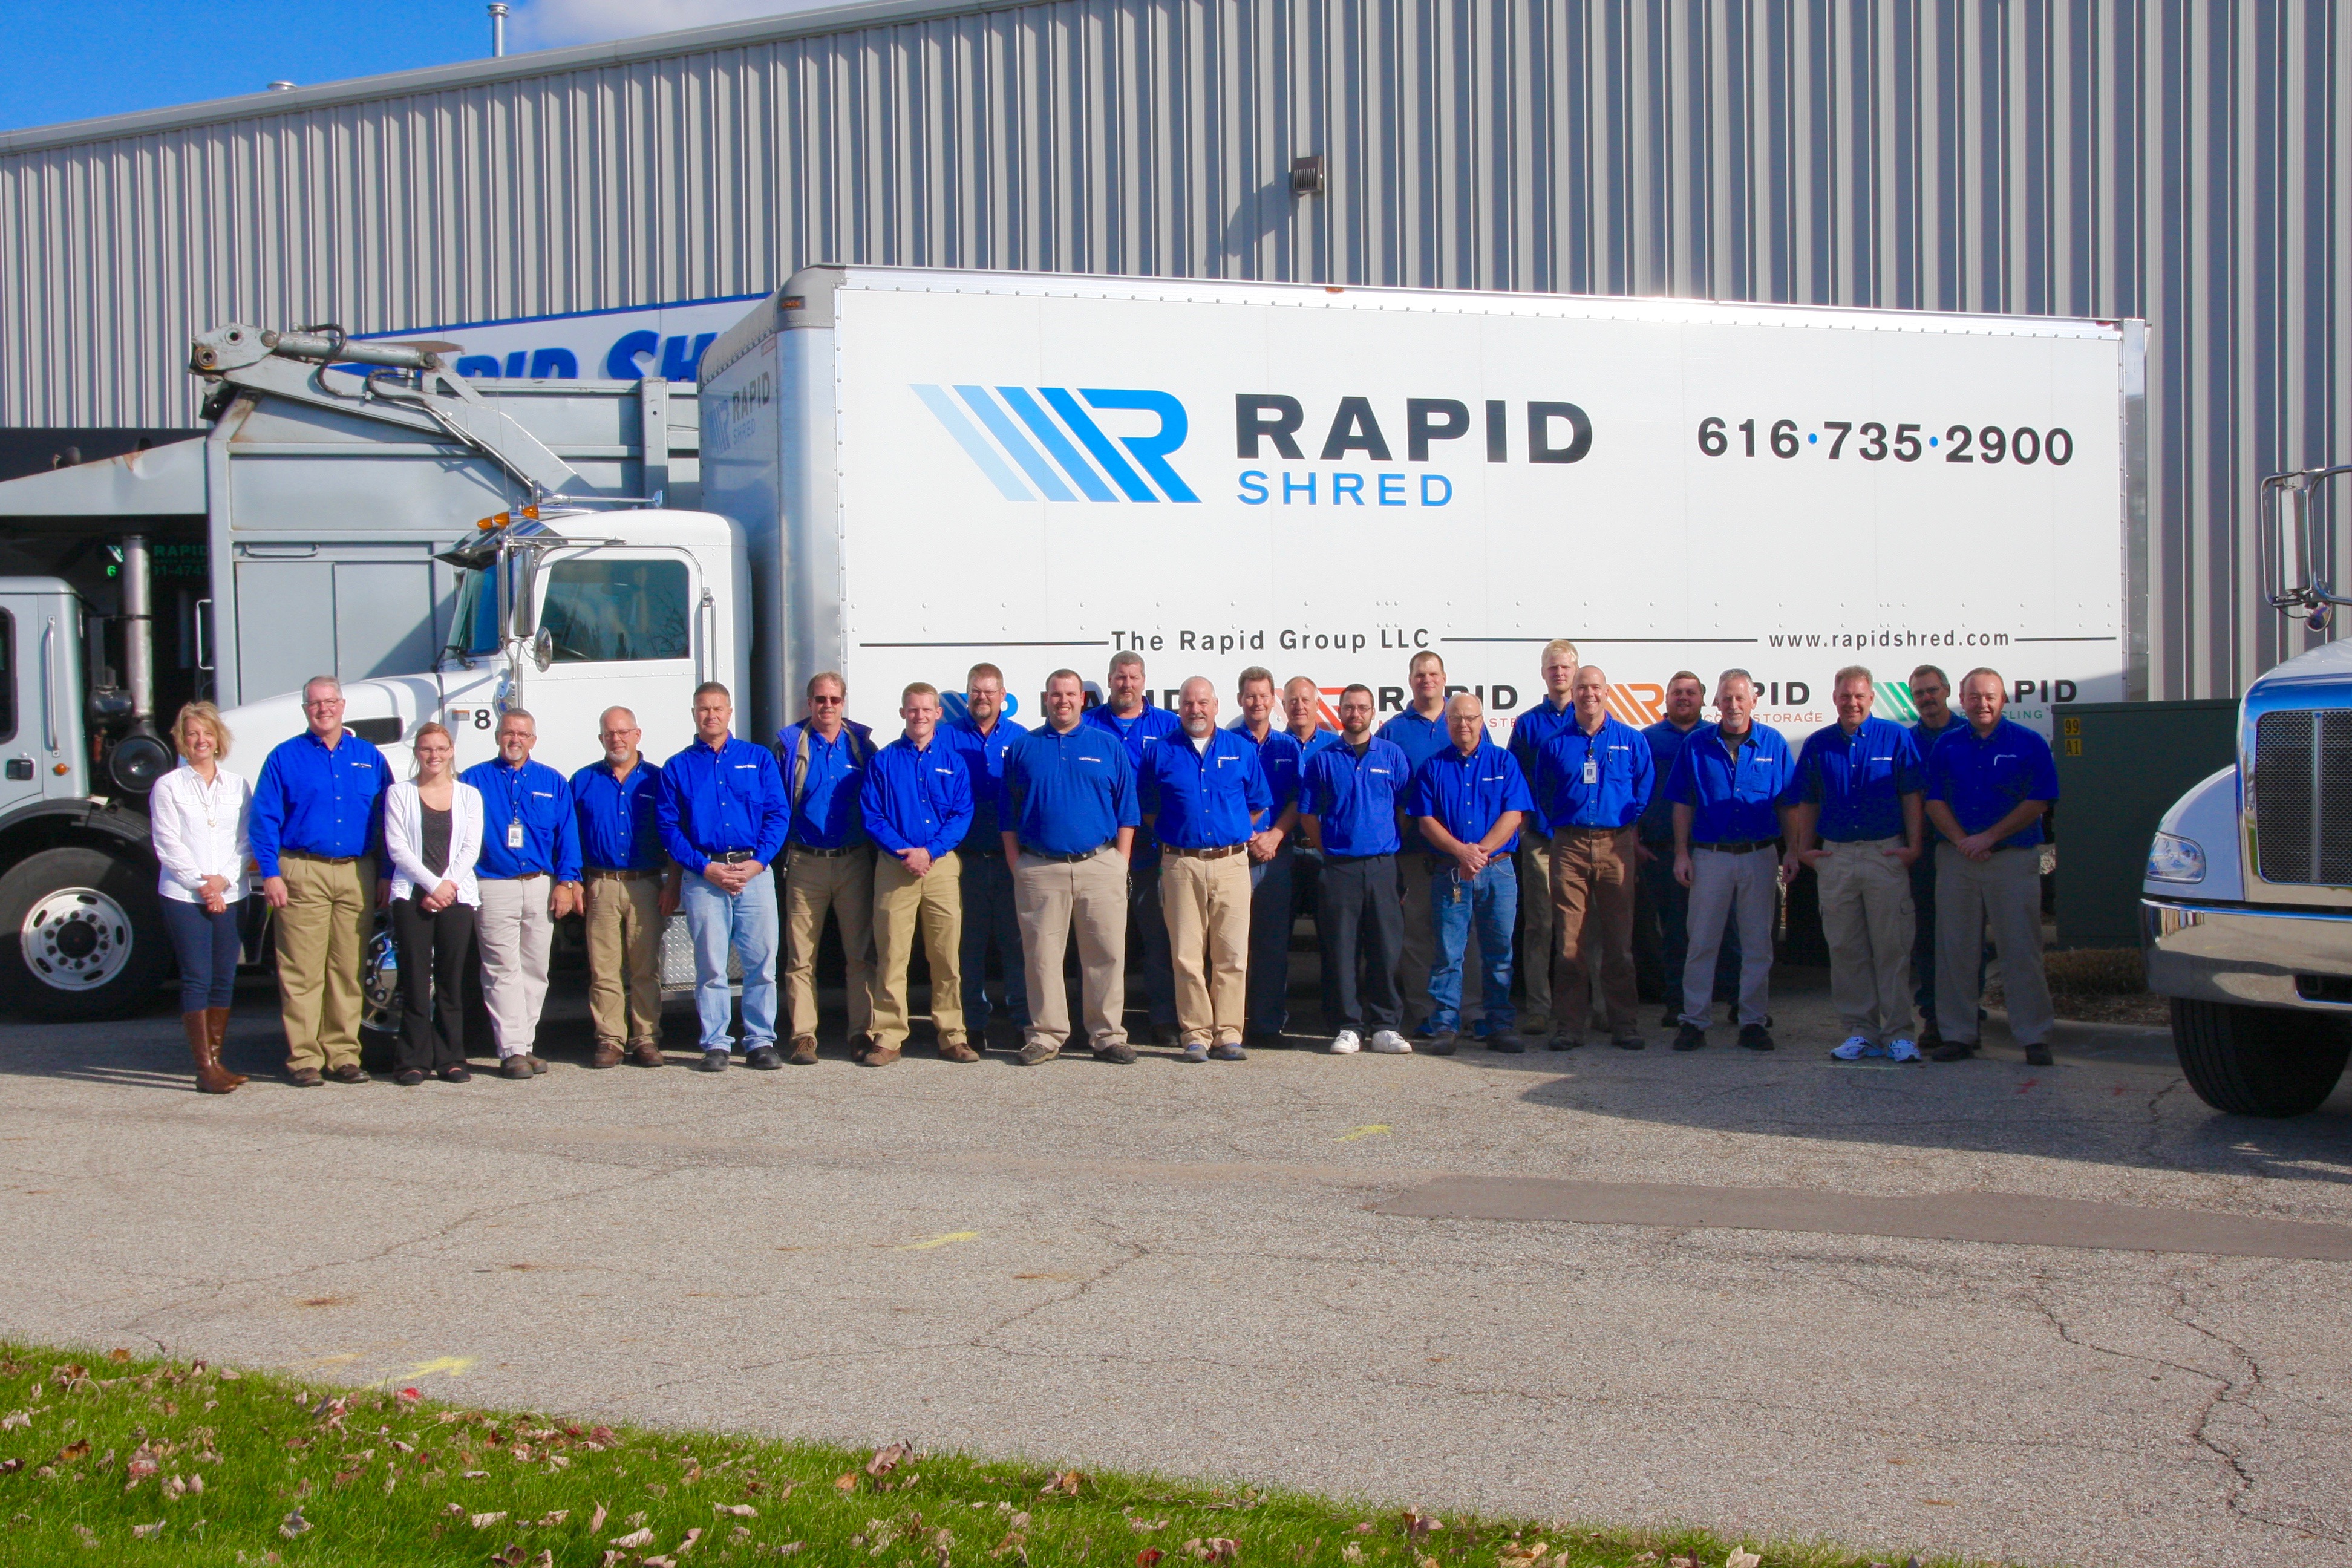 Rapid Team in front of Rapid Shred Truck